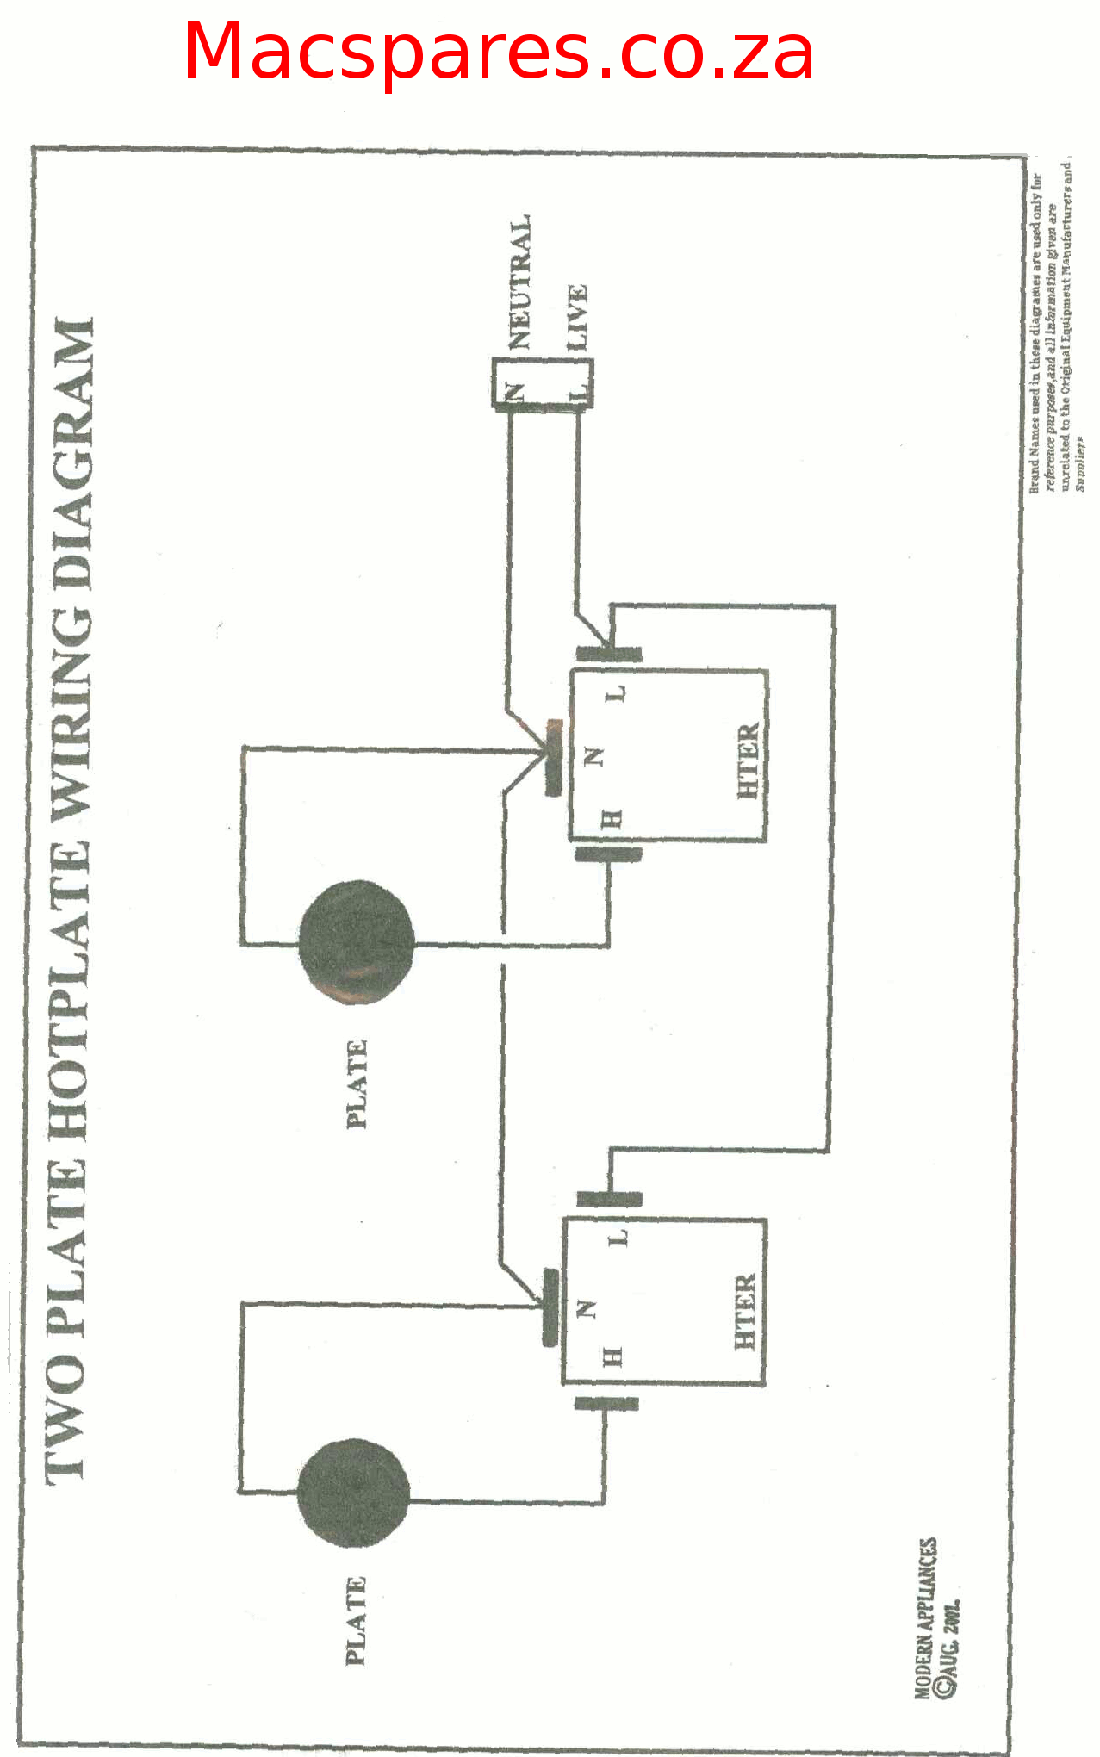 Mobile Home Light Switch Wiring Diagram from macspares.co.za